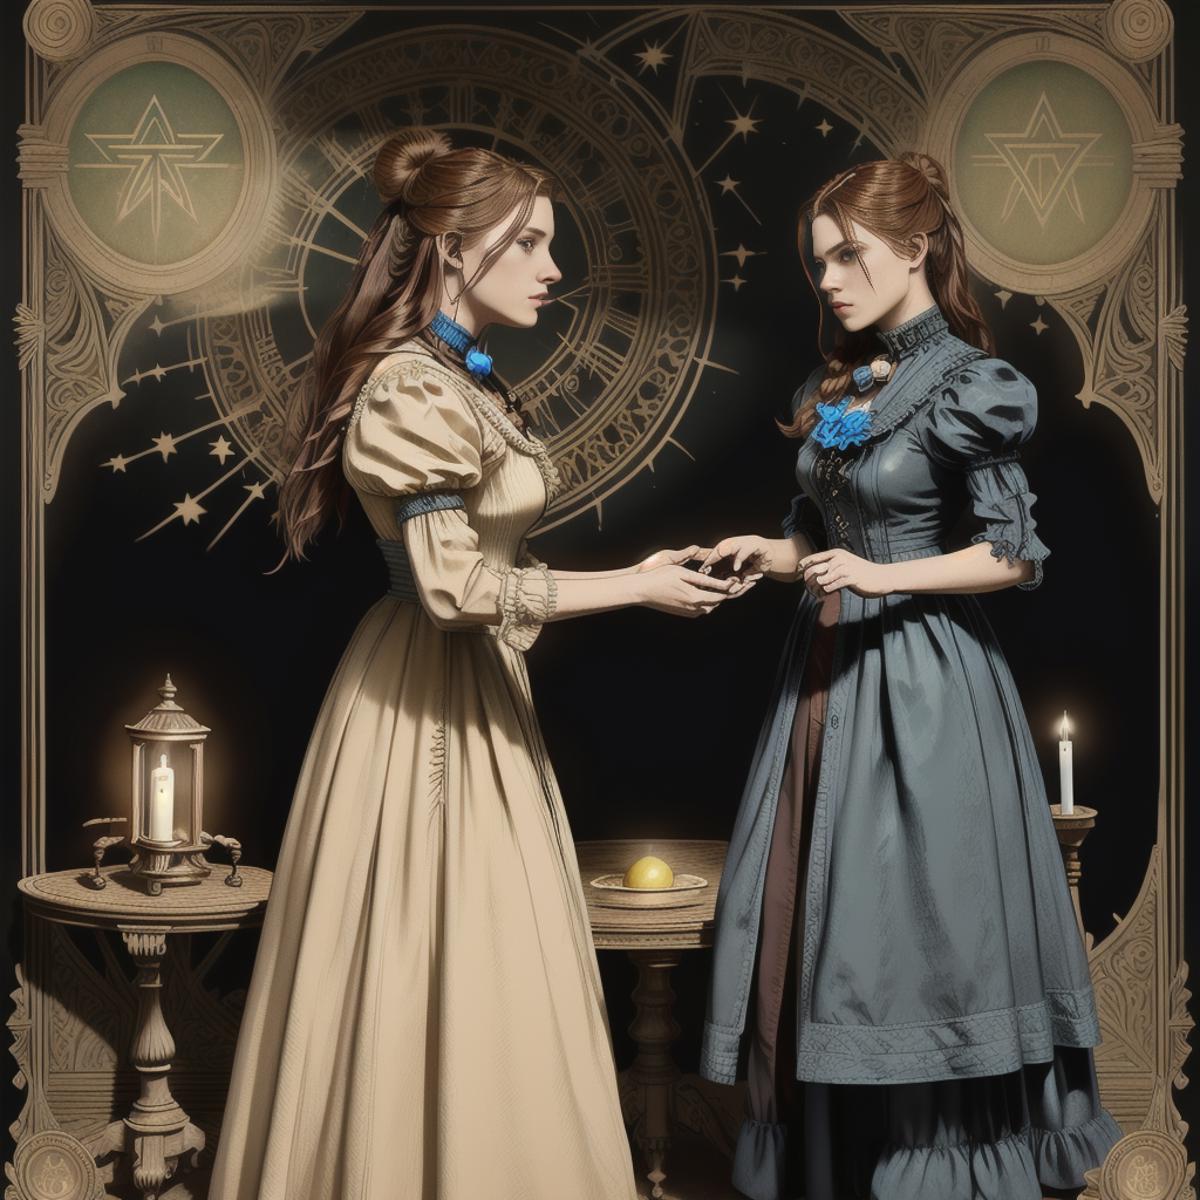 Victorian Esoteric image by DifferenceEngine